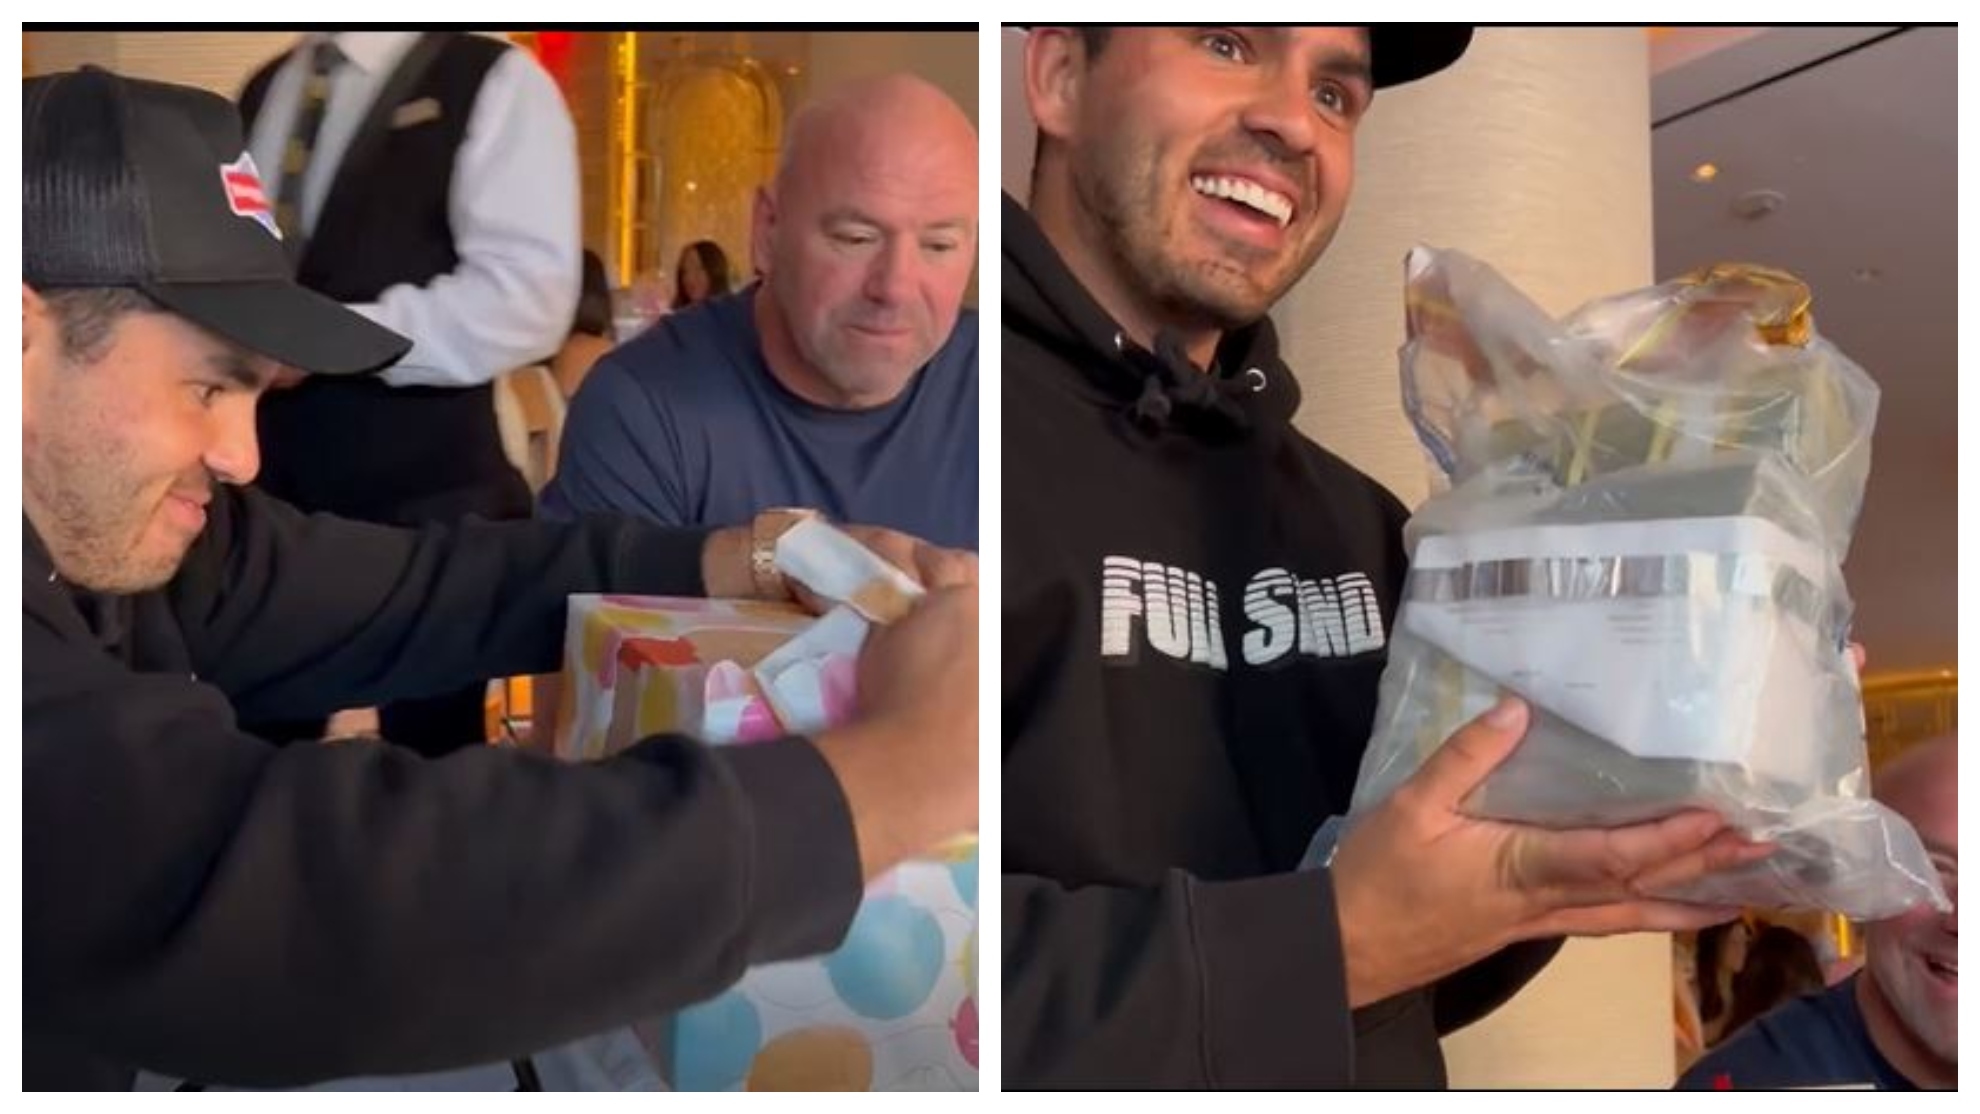 Want to know what $250,000 in cash looks like? UFC president Dana White's gift is mind blowing